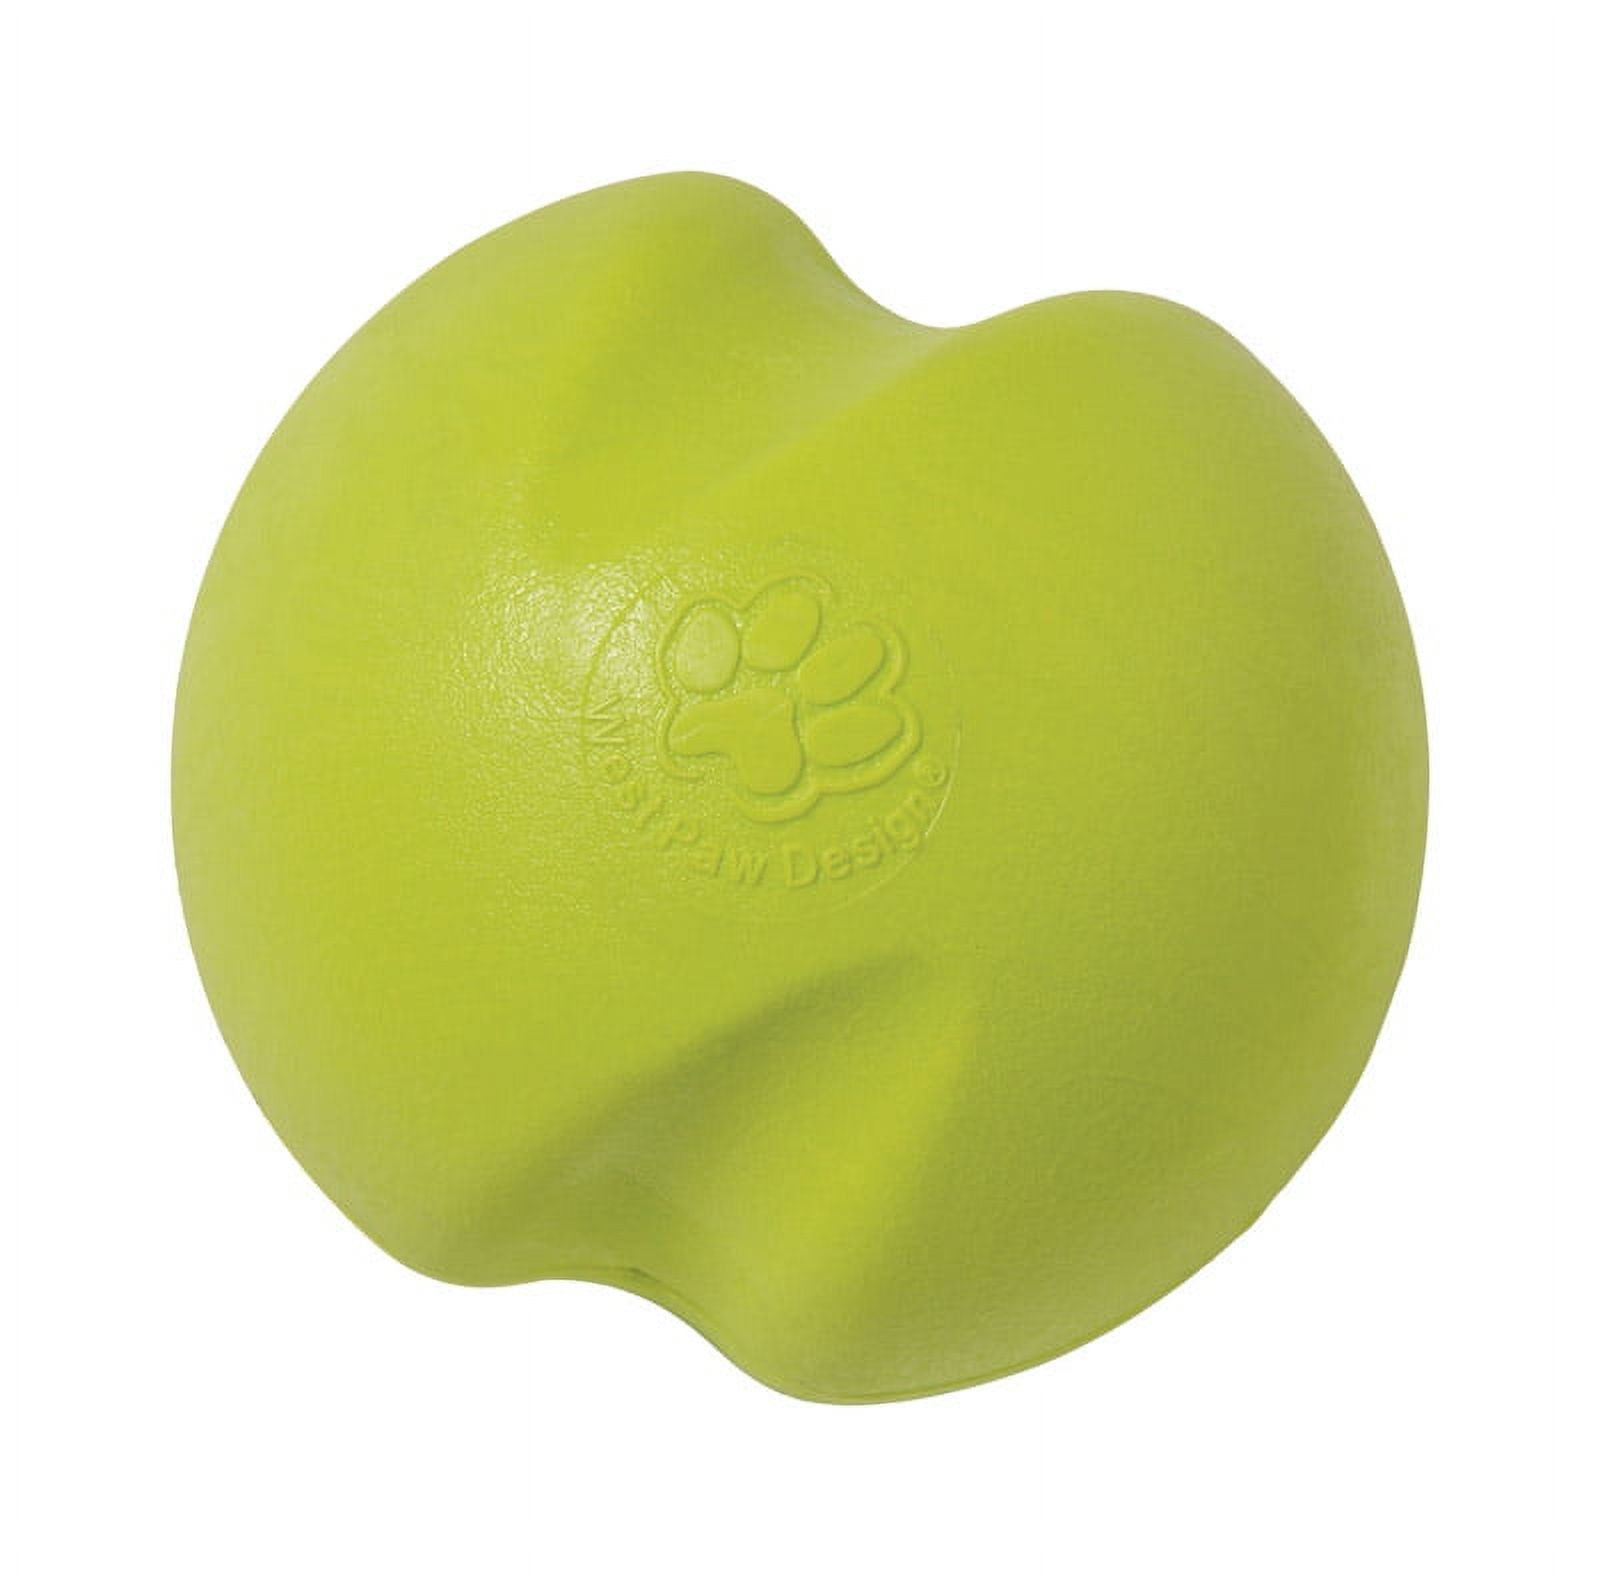 West Paw 8000380 Zogoflex Green Jive Synthetic Rubber Ball Dog Toy, Small